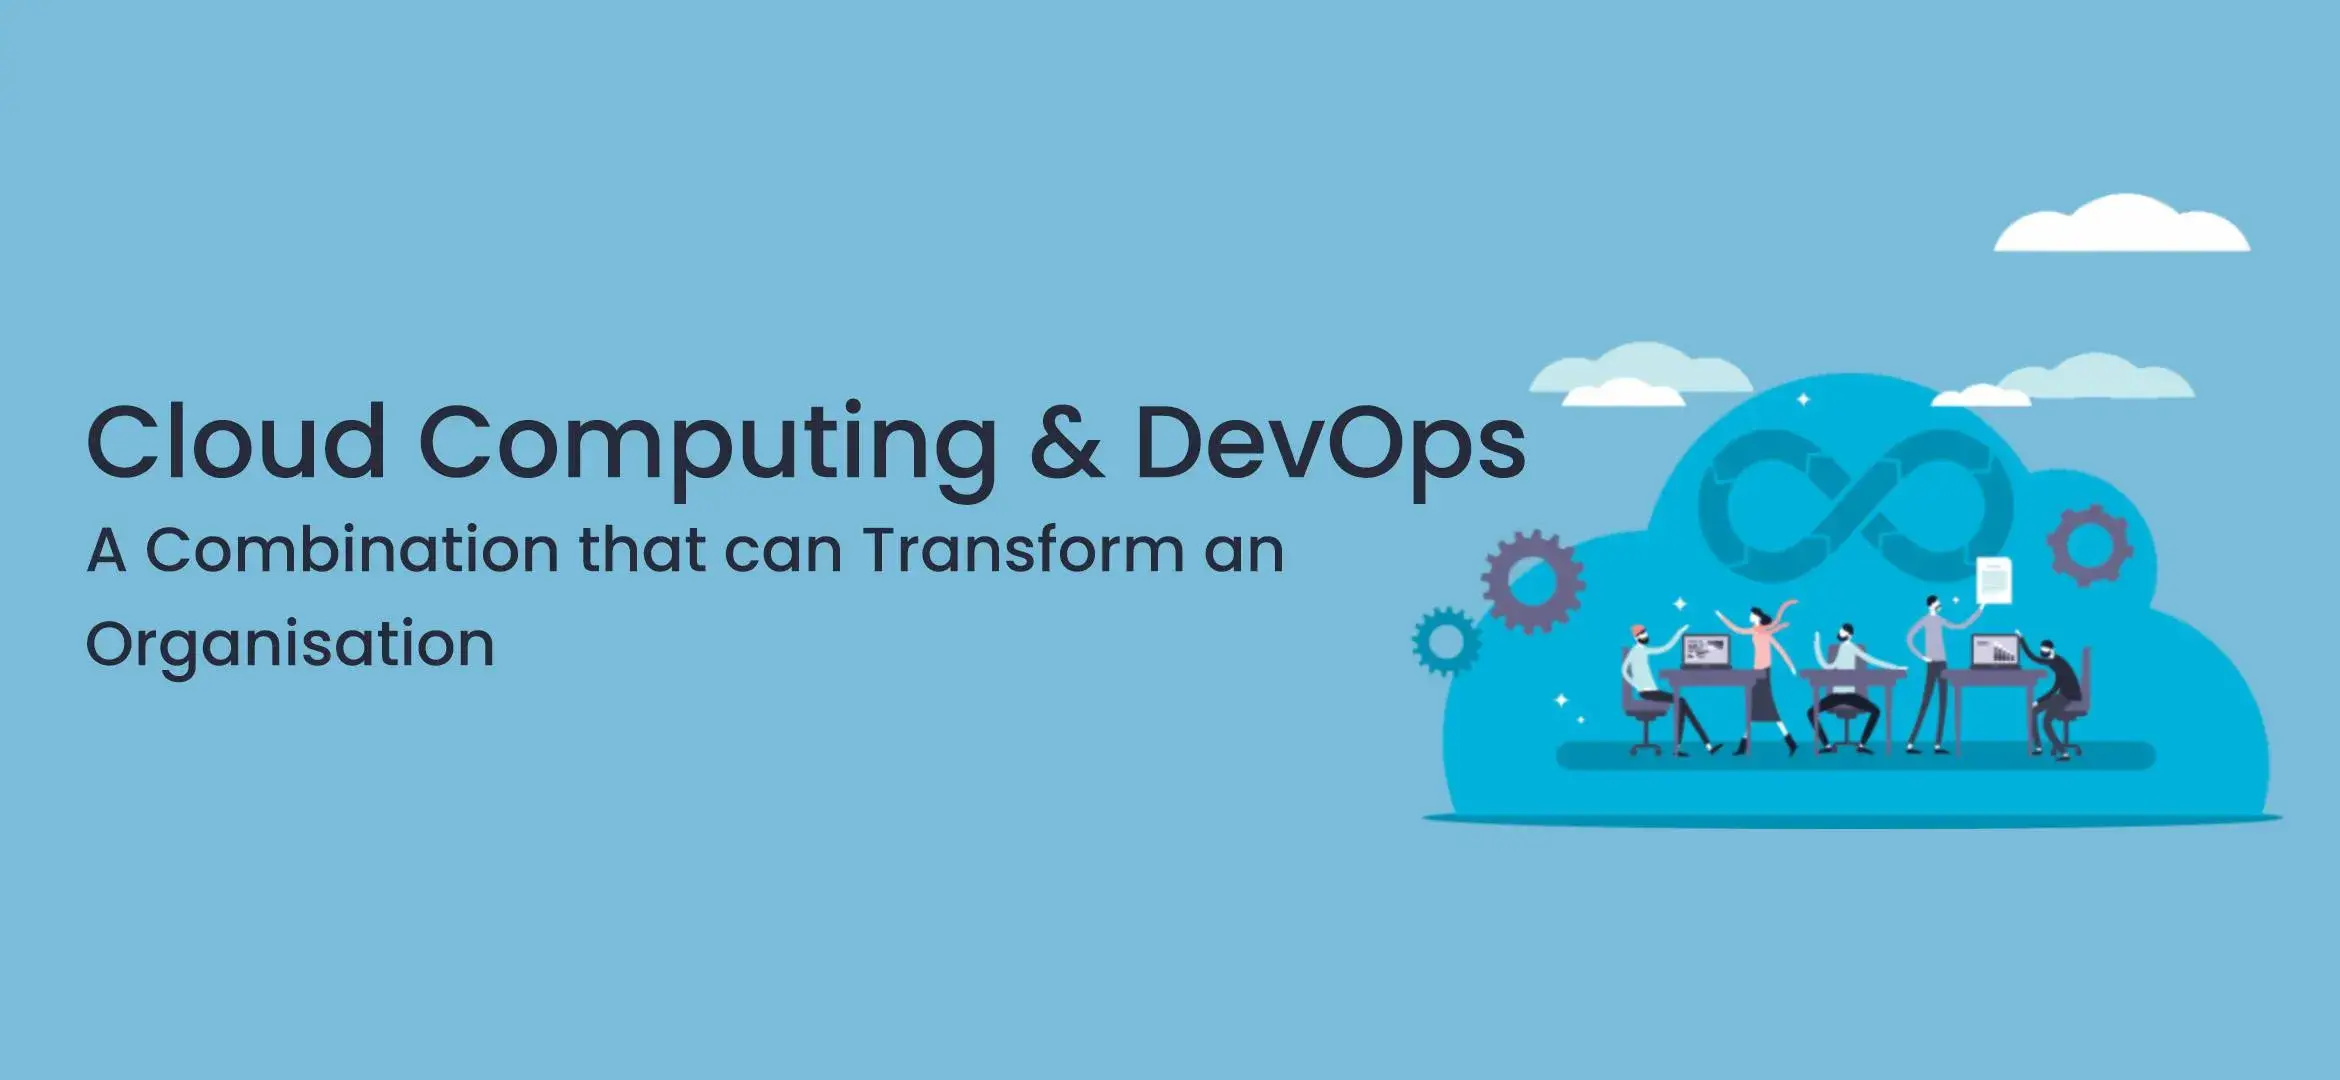 Cloud Computing and DevOps A Combination that can Transform an Organization